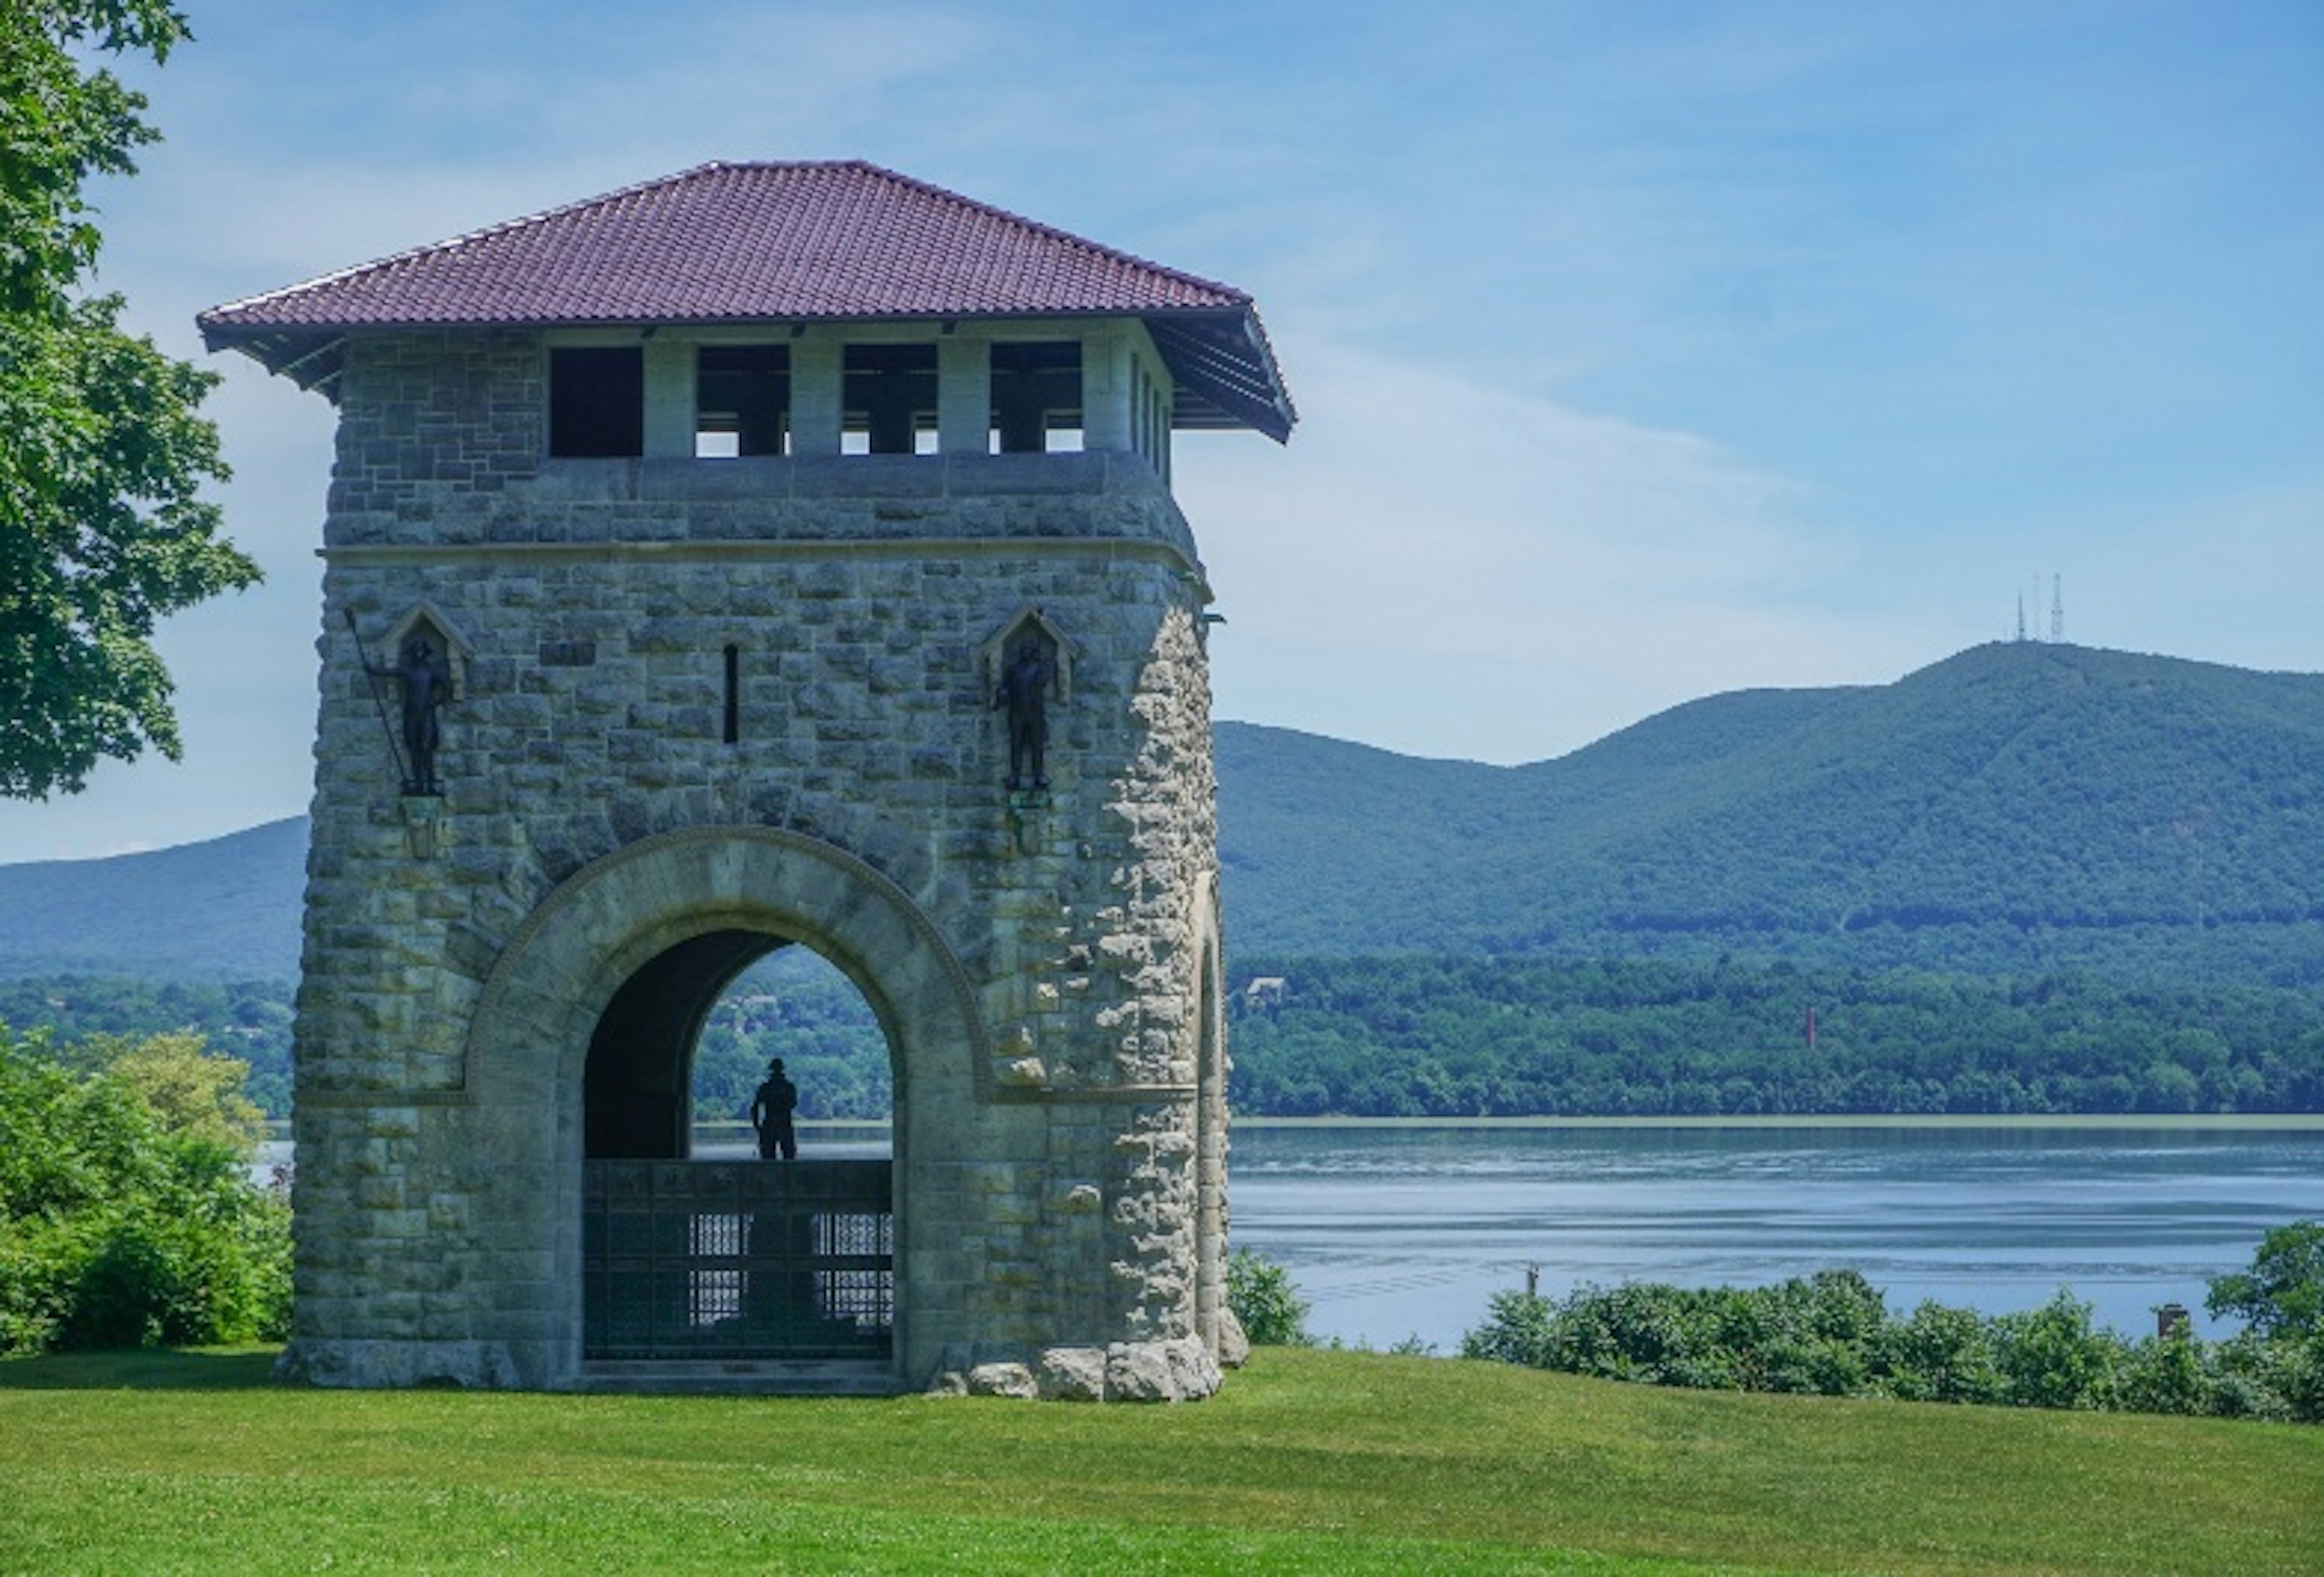 Newburgh, The restored Tower of Victory at Washington's Headquarters National Historic Landmark, on the Hudson River.